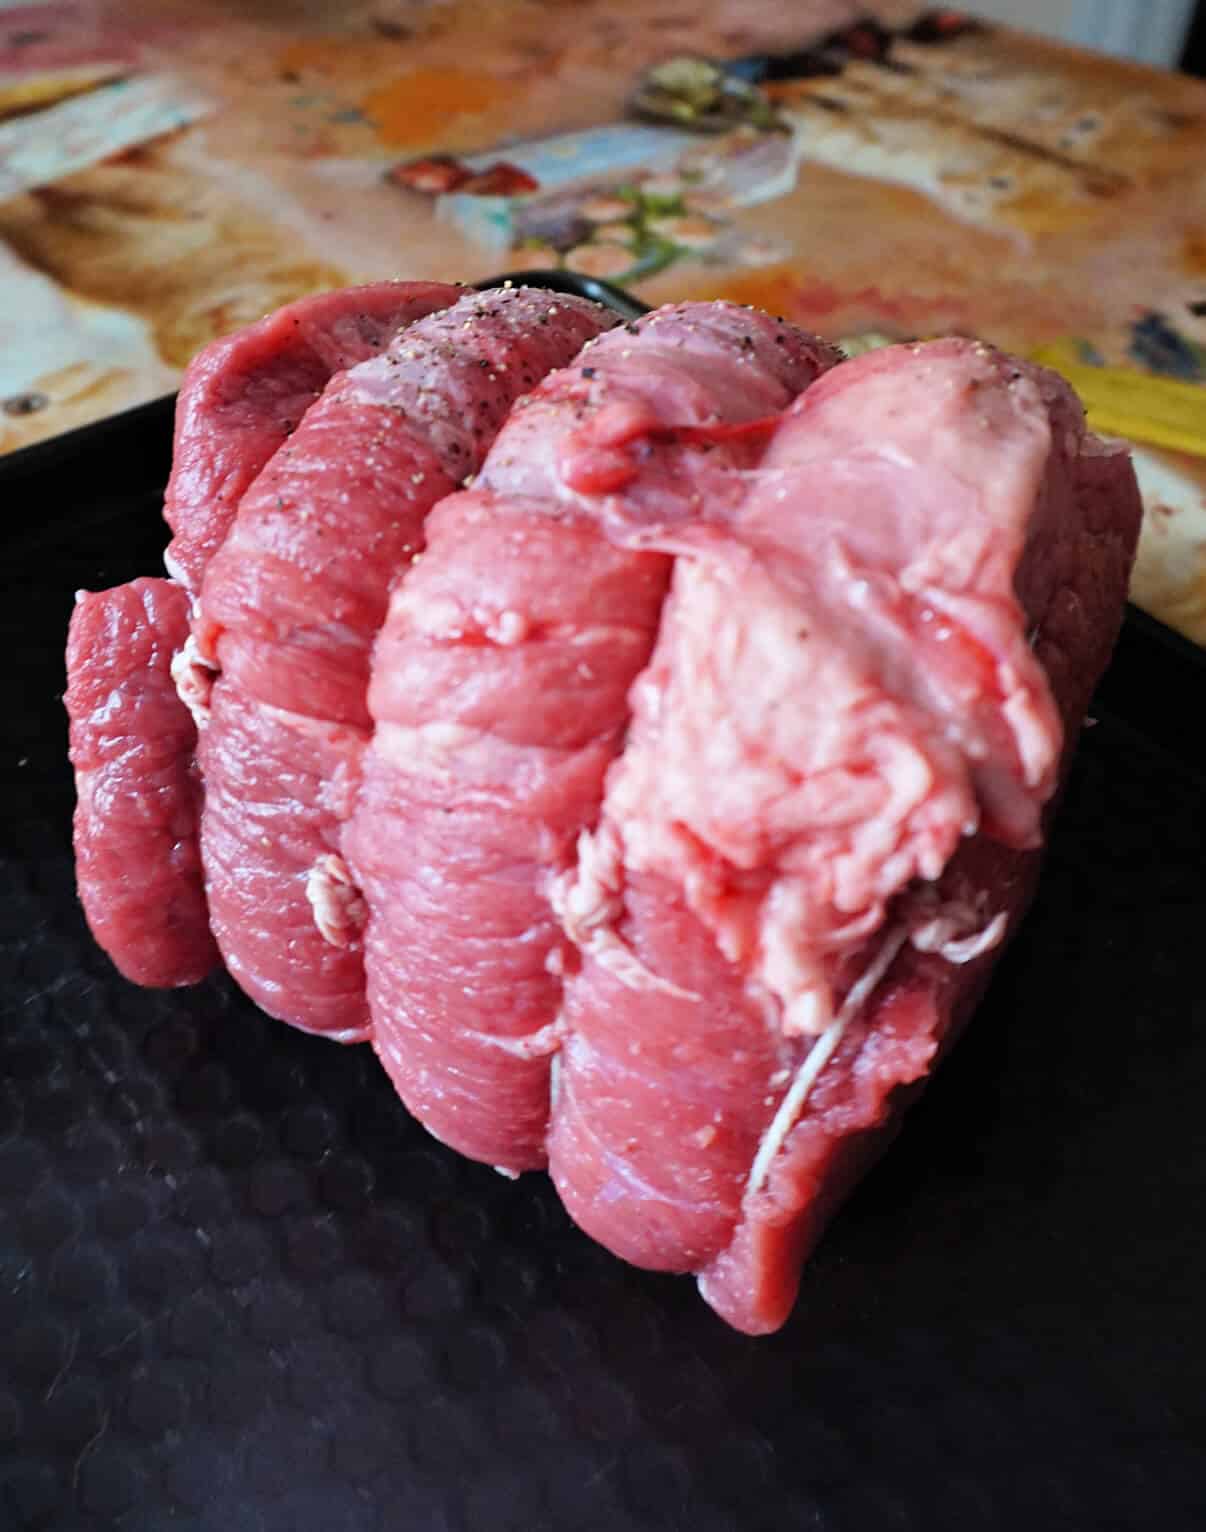 An uncooked joint of beef.